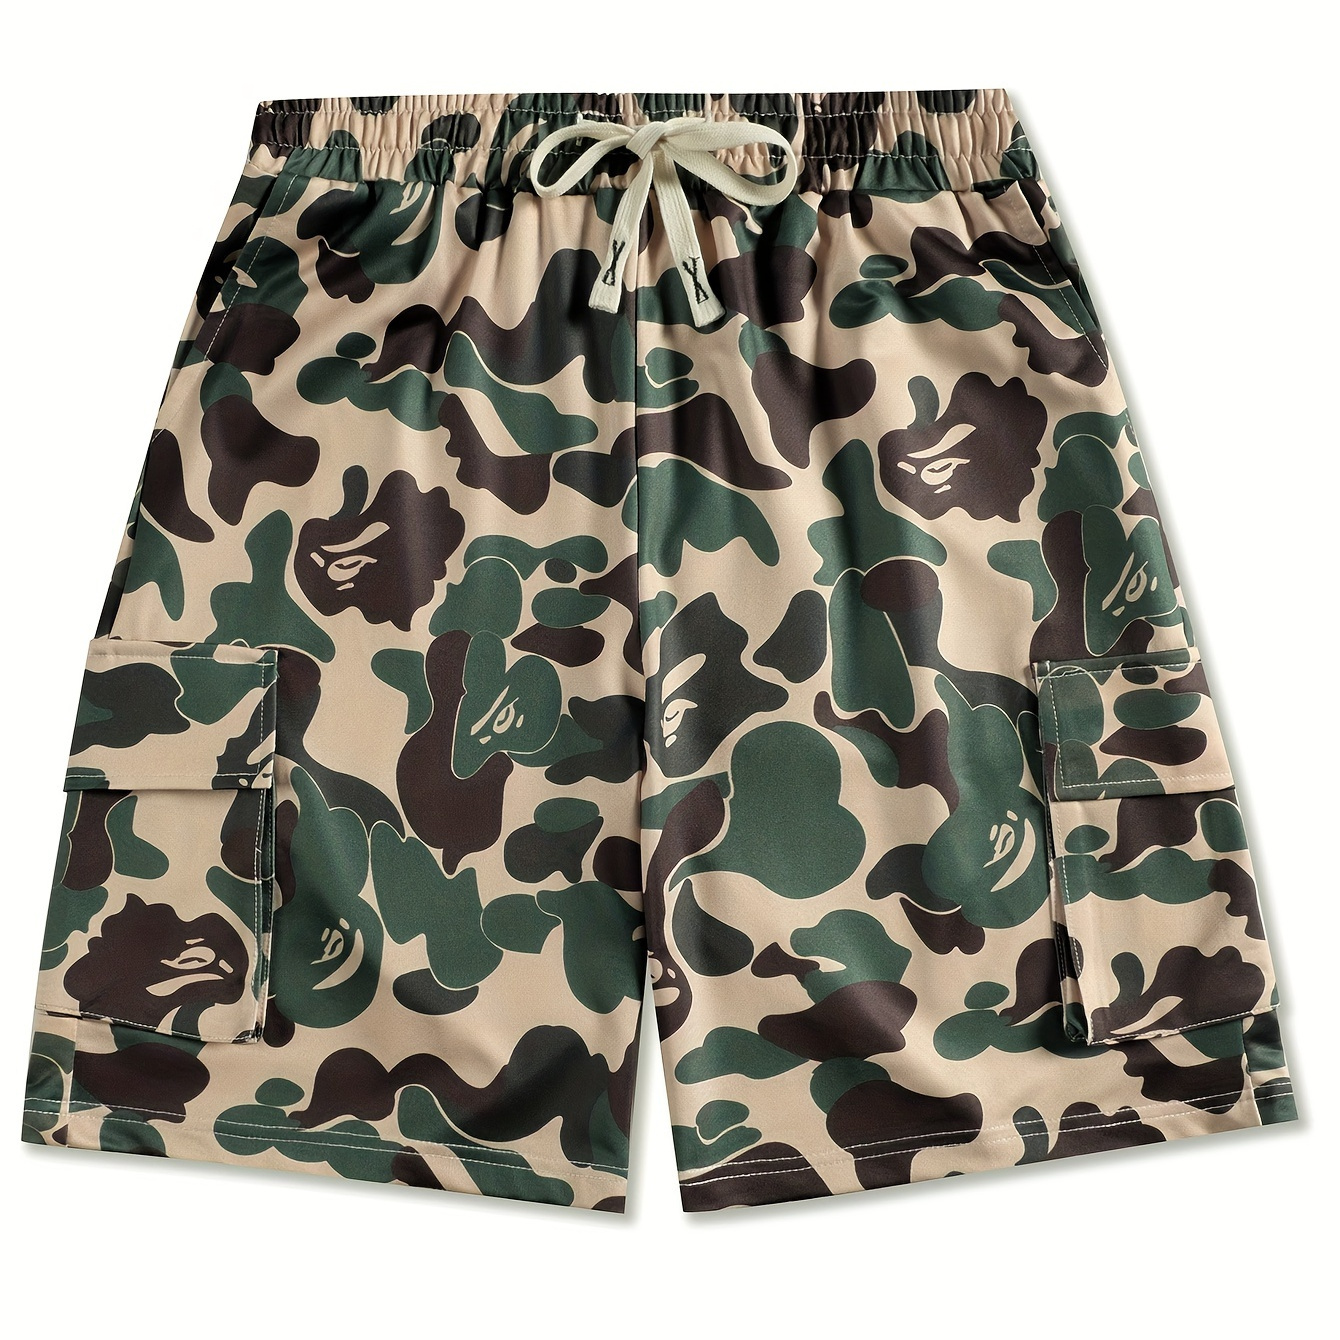 

Camouflage Pattern Shorts With Drawstring And Pockets, Versatile And Casual Shorts For Men's Summer Outdoors Activities